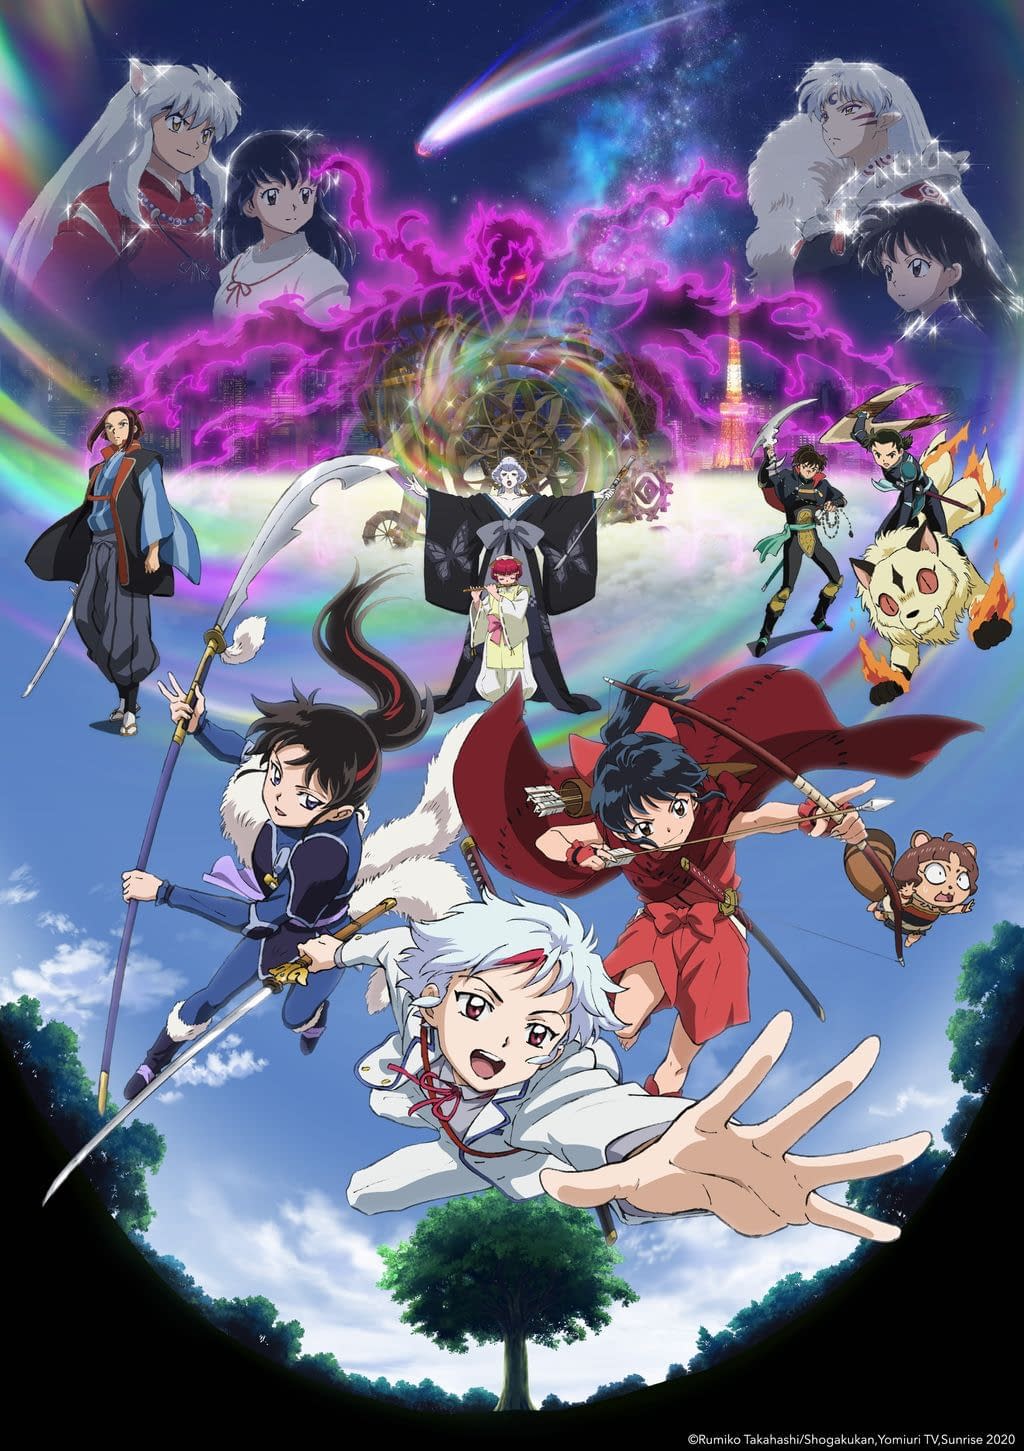 Funimation Fall 2021 Anime Streaming Lineup Announced